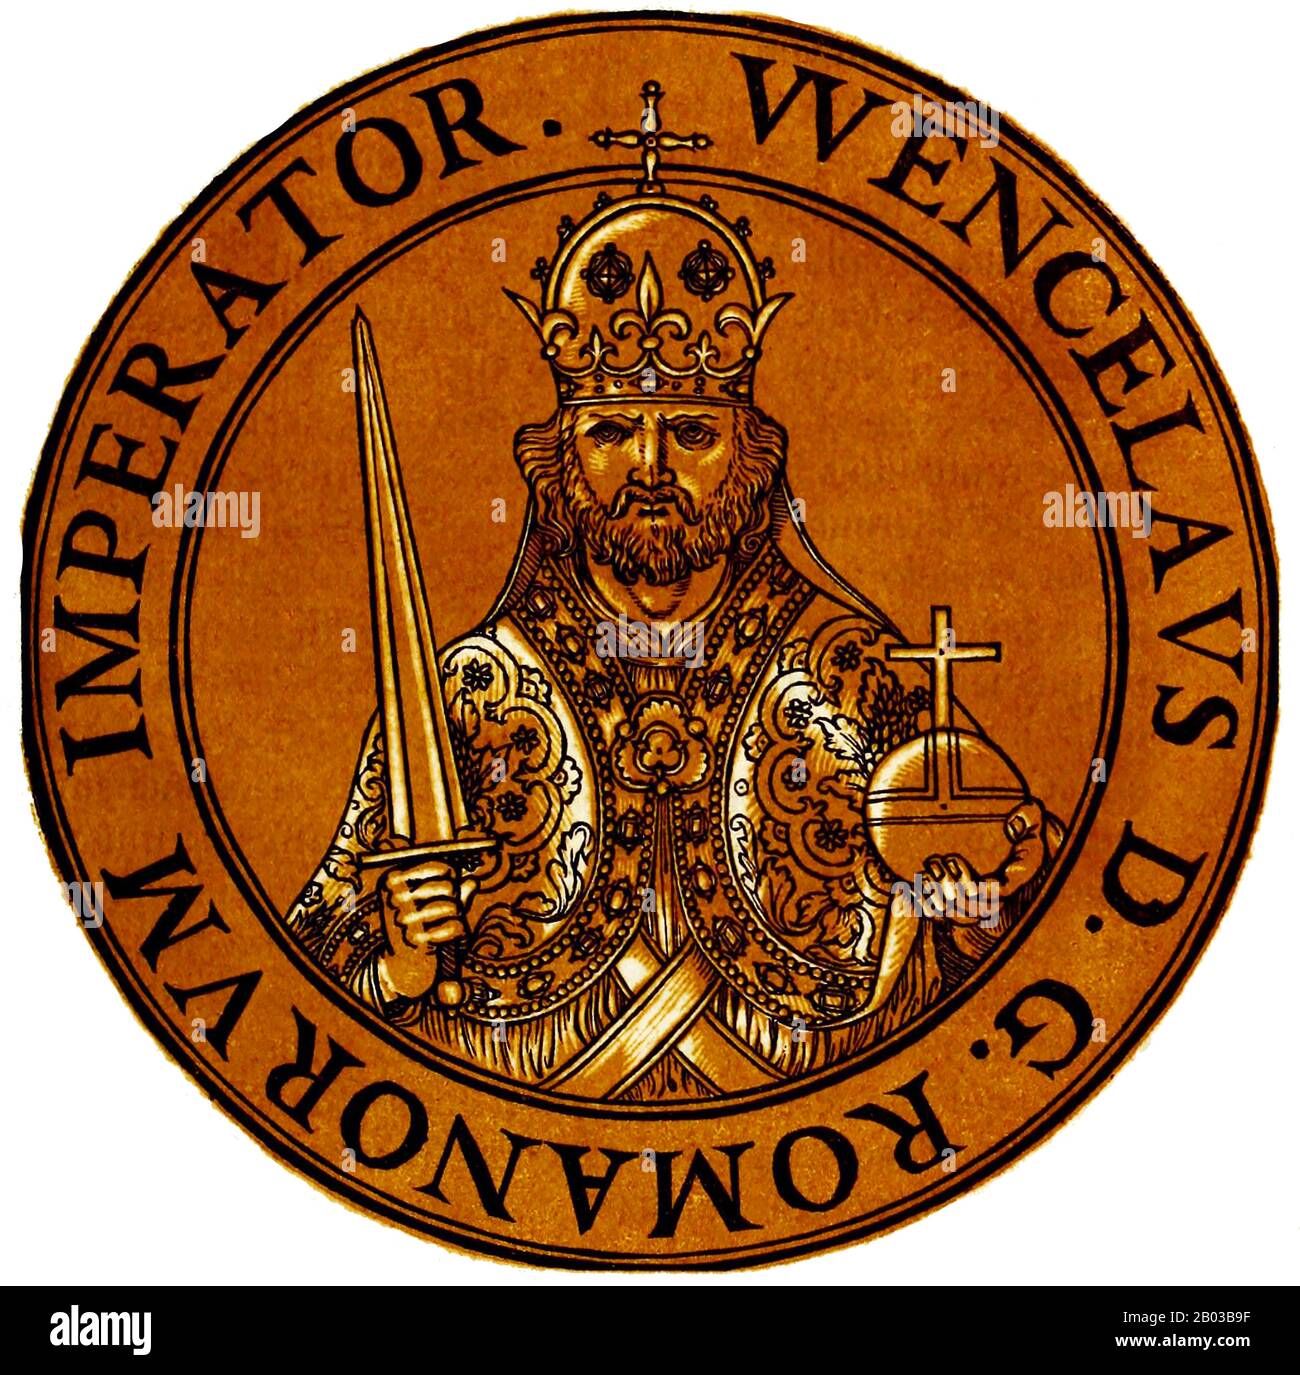 Wenceslaus IV (1361-1419), also known as Wenceslaus of Bohemia and Wenceslaus the Idle, was the son of Emperor Charles IV and became King of Bohemia in 1363, aged only two. He was elected as King of Germany in 1376 by the actions of his father, who passed away in 1378, making Wenceslaus sole ruler of Bohemia and the Holy Roman Empire. Stock Photo